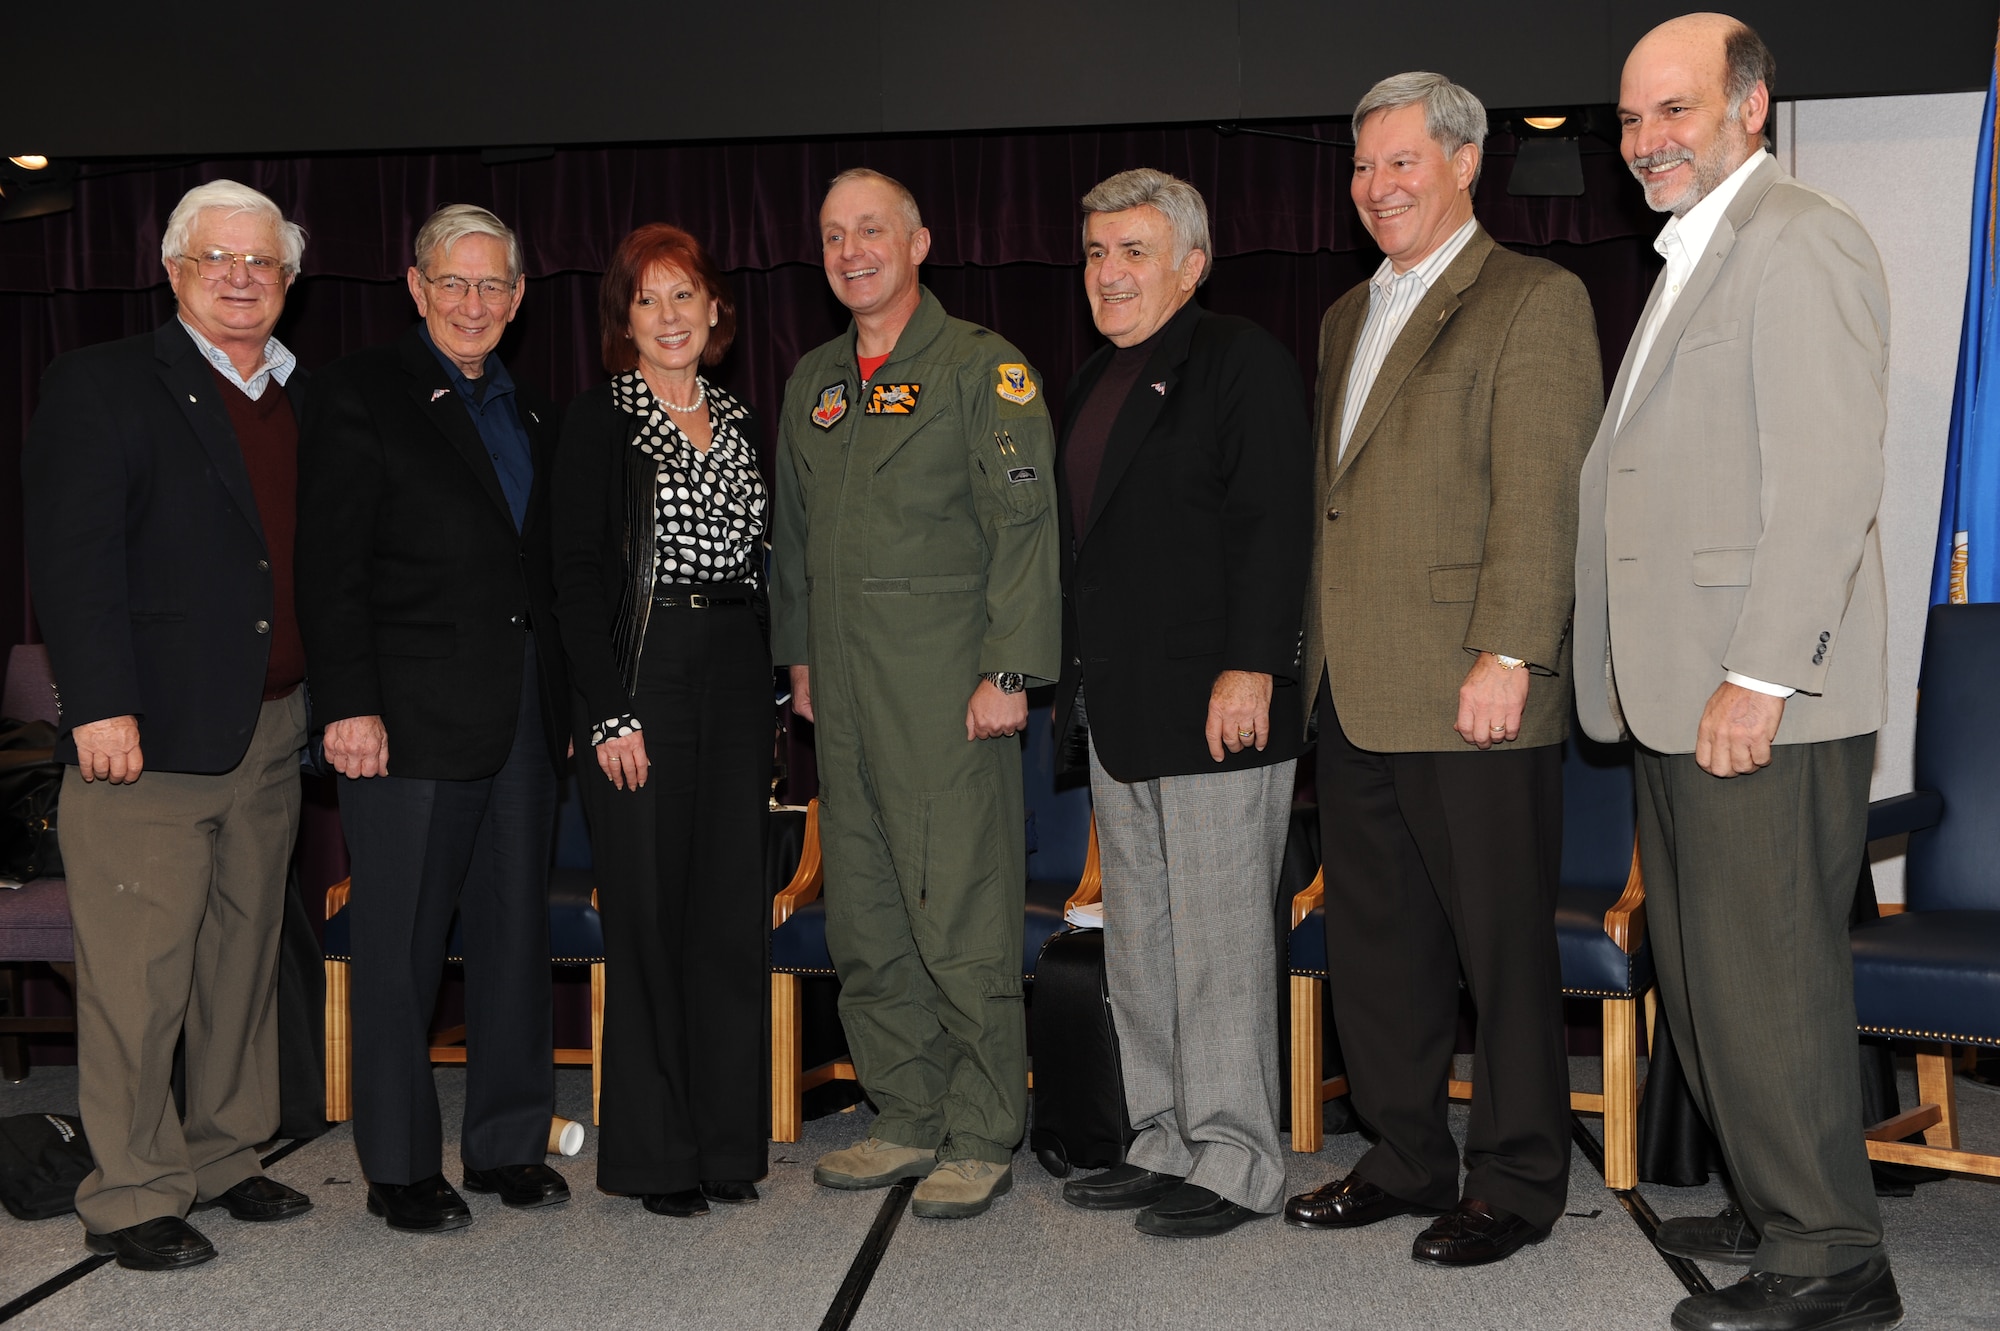 - John Cashen the designer of the low observable radar feature of the B-2 aircraft, Irv Waaland the B-2 airframe designer, Doctor Janet Fender the Air Combat Command chief scientist, Brig. Gen. Garret Harencak 509th Bomb Wing commander, Jim Kinnu the program manager, John Griffin the government chief engineer, and Dave Mazur Northrop Grumman's MP-RTIP program manager, pose for a group photo after the “Fathers of Stealth” presentation Jan 16. The “Fathers of Stealth” commemorate the Twentieth Anniversary of the B-2 Stealth Bomber.  Mr. Cashen, Mr. Waaland, Mr. Kinnu, and Mr. Griffin, the four “Fathers of Stealth” gave a briefing on the events that lead up to the production of the B-2. The information they provided included the beginning concept of a flying wing to the troubles and hurdles during the designing of the B-2 Stealth.  The presentation revealed the blood and sweat that went into this aircraft. (U.S. Air Force Photo/ Airman 1st Class Carlin Leslie)